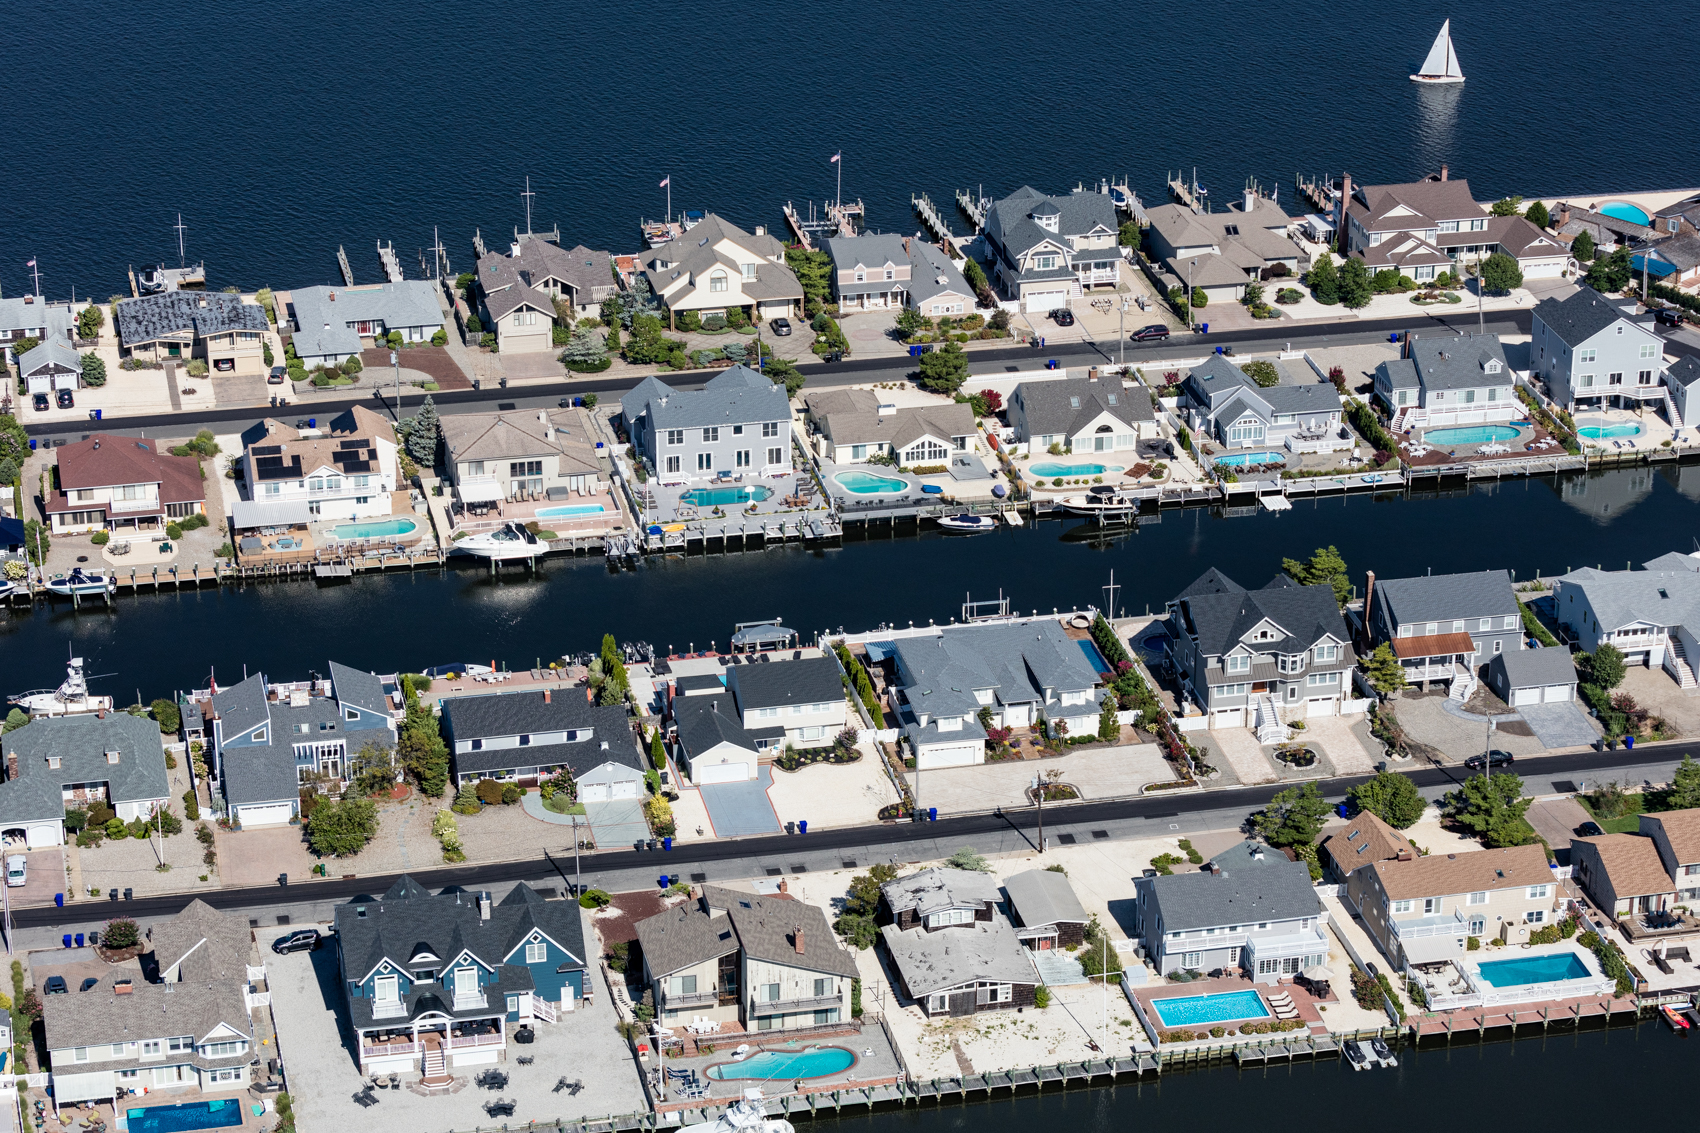 A dredged and filled development of second homes in Mantoloking, New Jersey, each with waterfront access and dockage.